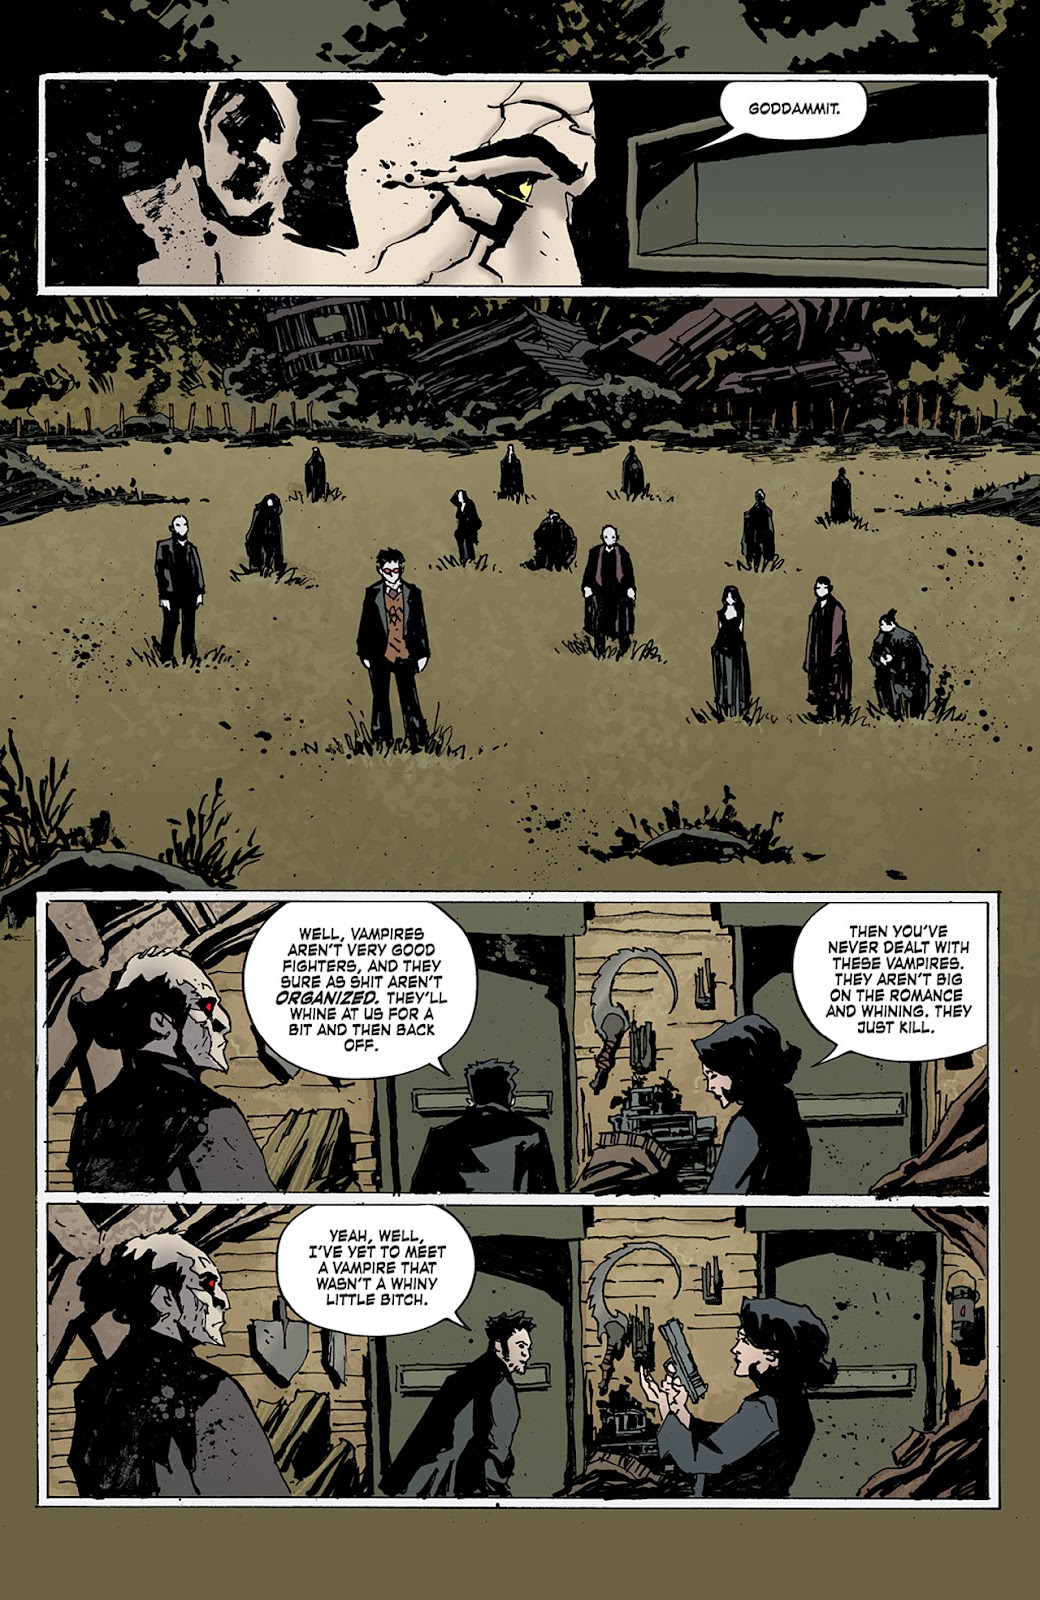 Criminal Macabre: Final Night - The 30 Days of Night Crossover issue 3 - Page 15